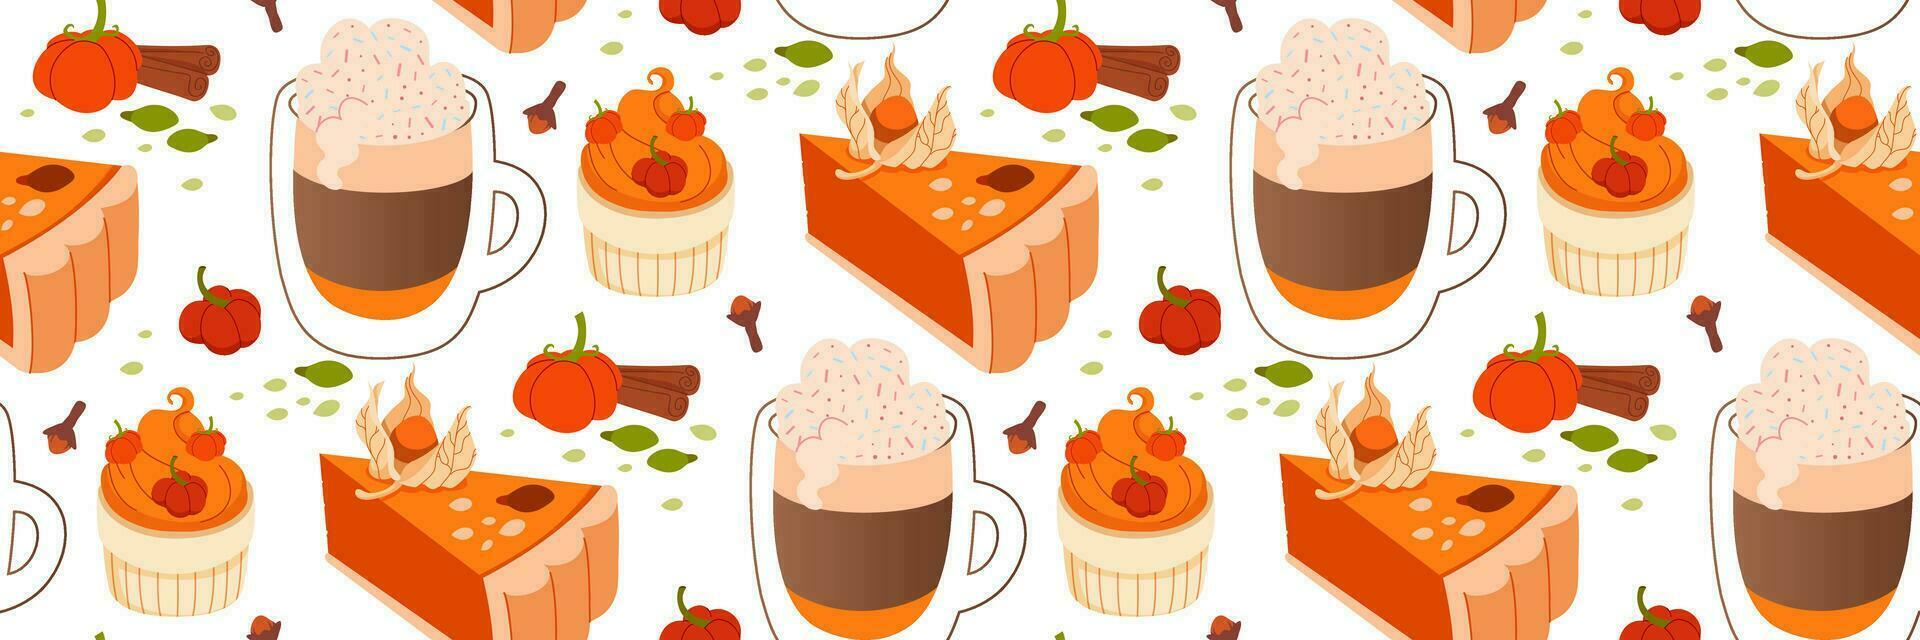 Autumn Pumpkin spice seamless pattern. Delicious winter pastries on white background. Autumn food and drinks. Collection of tasty sweet desserts. For fabric print wallpaper. Vector flat illustration.